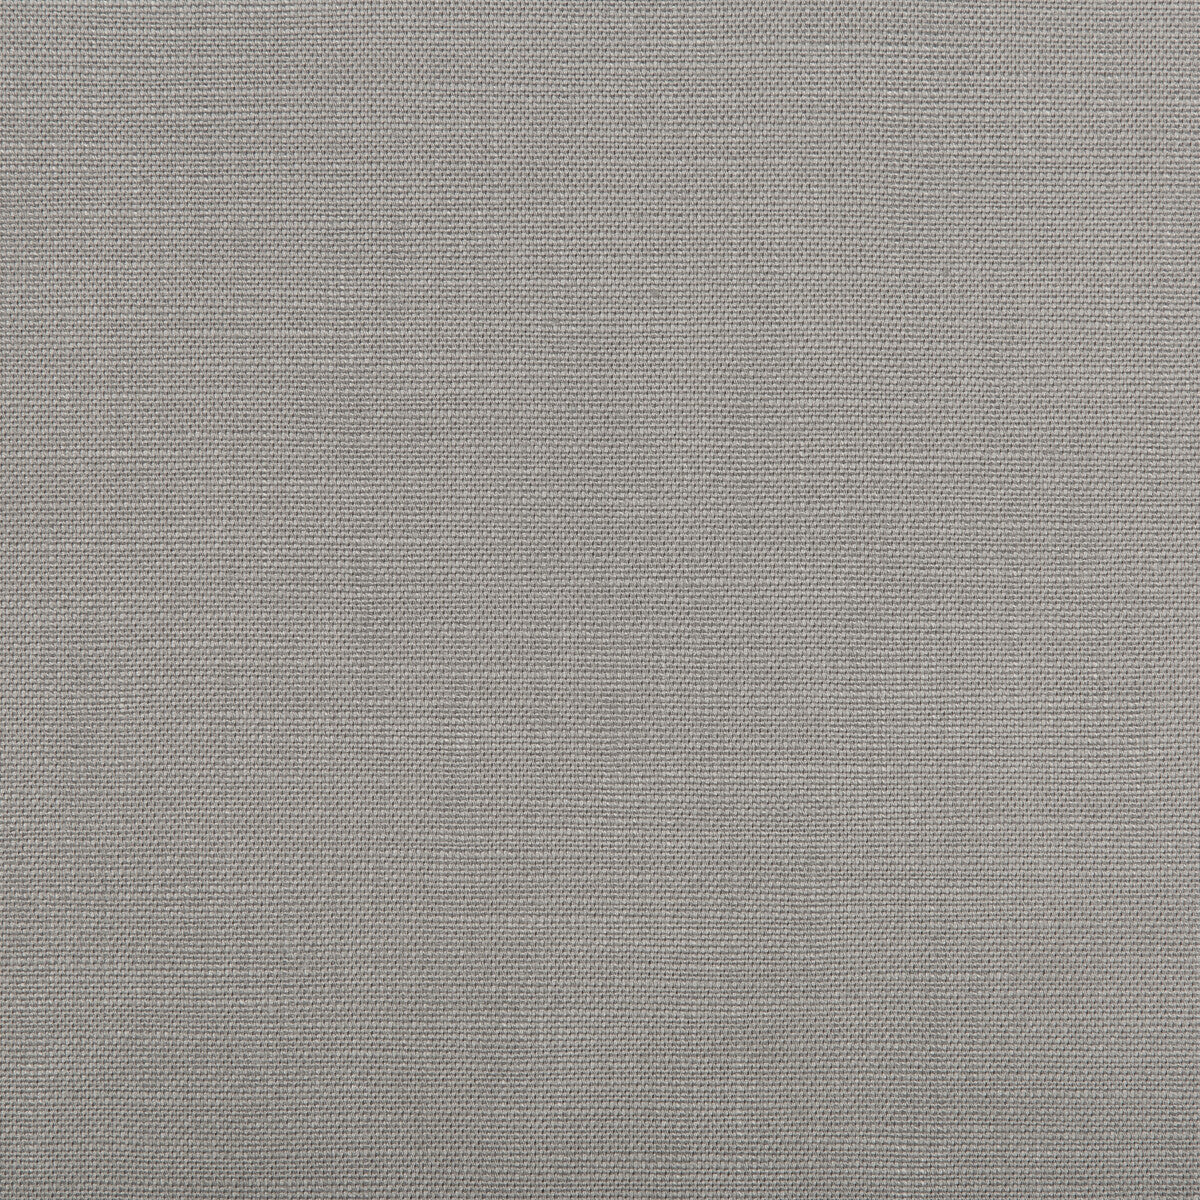 Kravet Contract fabric in 4648-11 color - pattern 4648.11.0 - by Kravet Contract